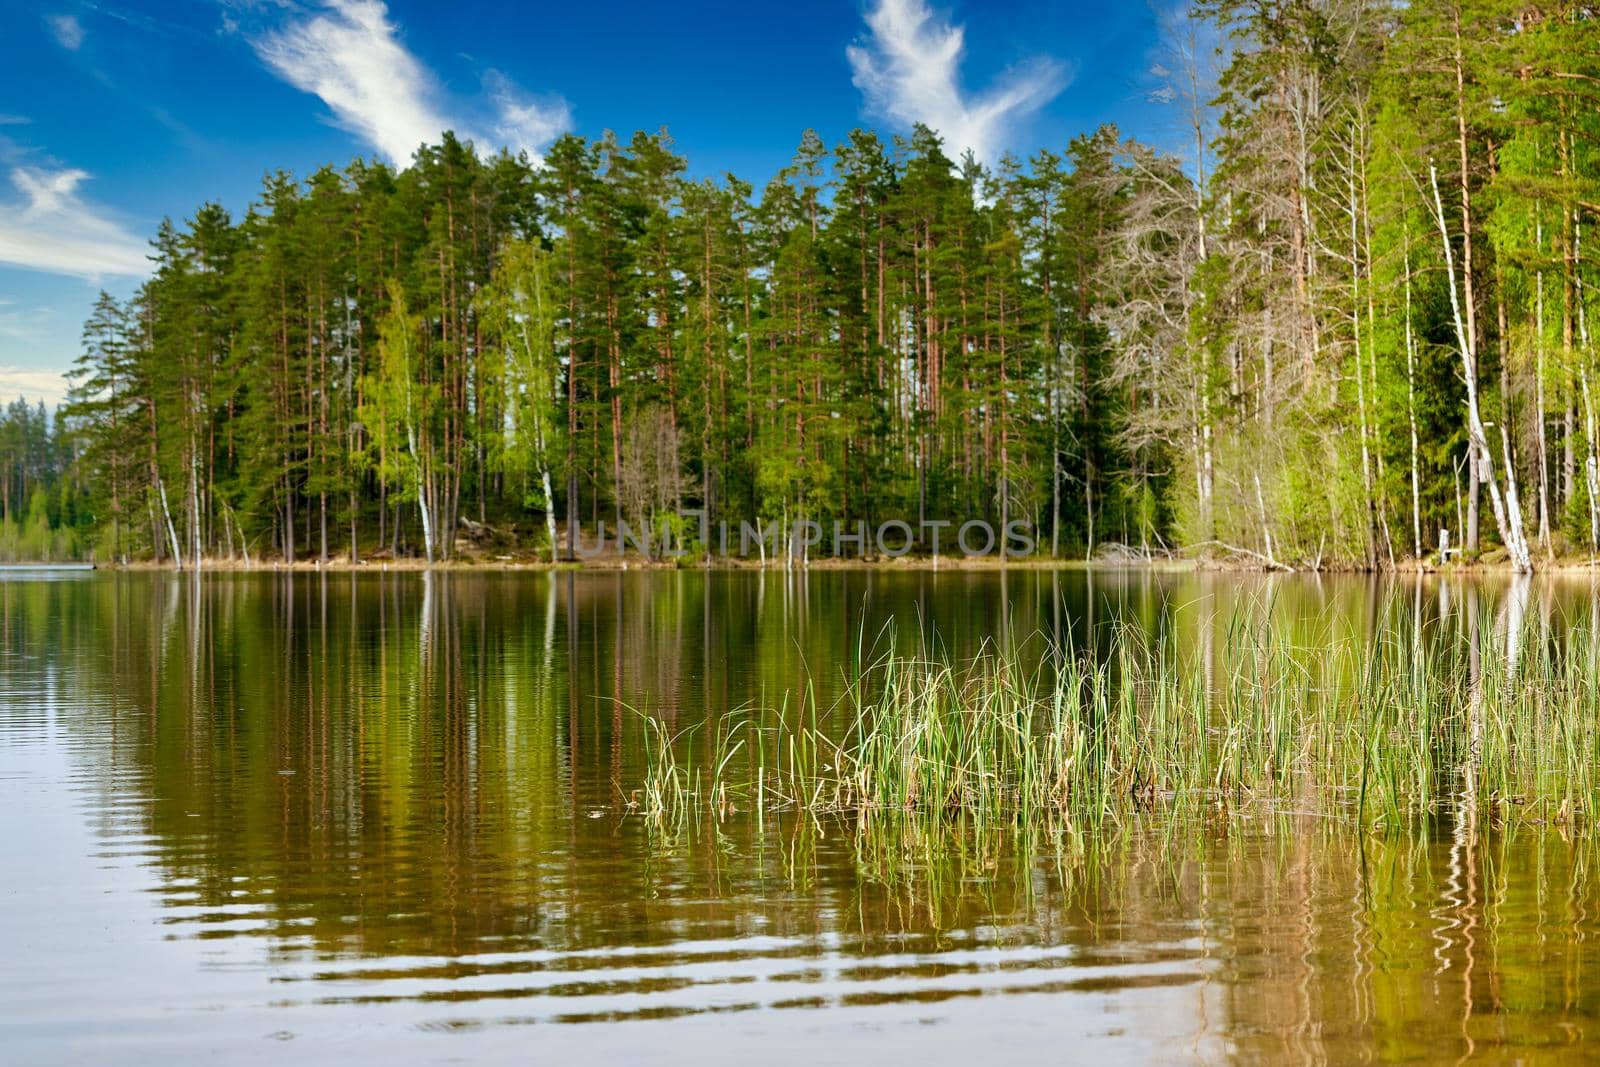 Pine trees on the shore of a forest lake against the background of a blue sky with clouds. Summer sunny day